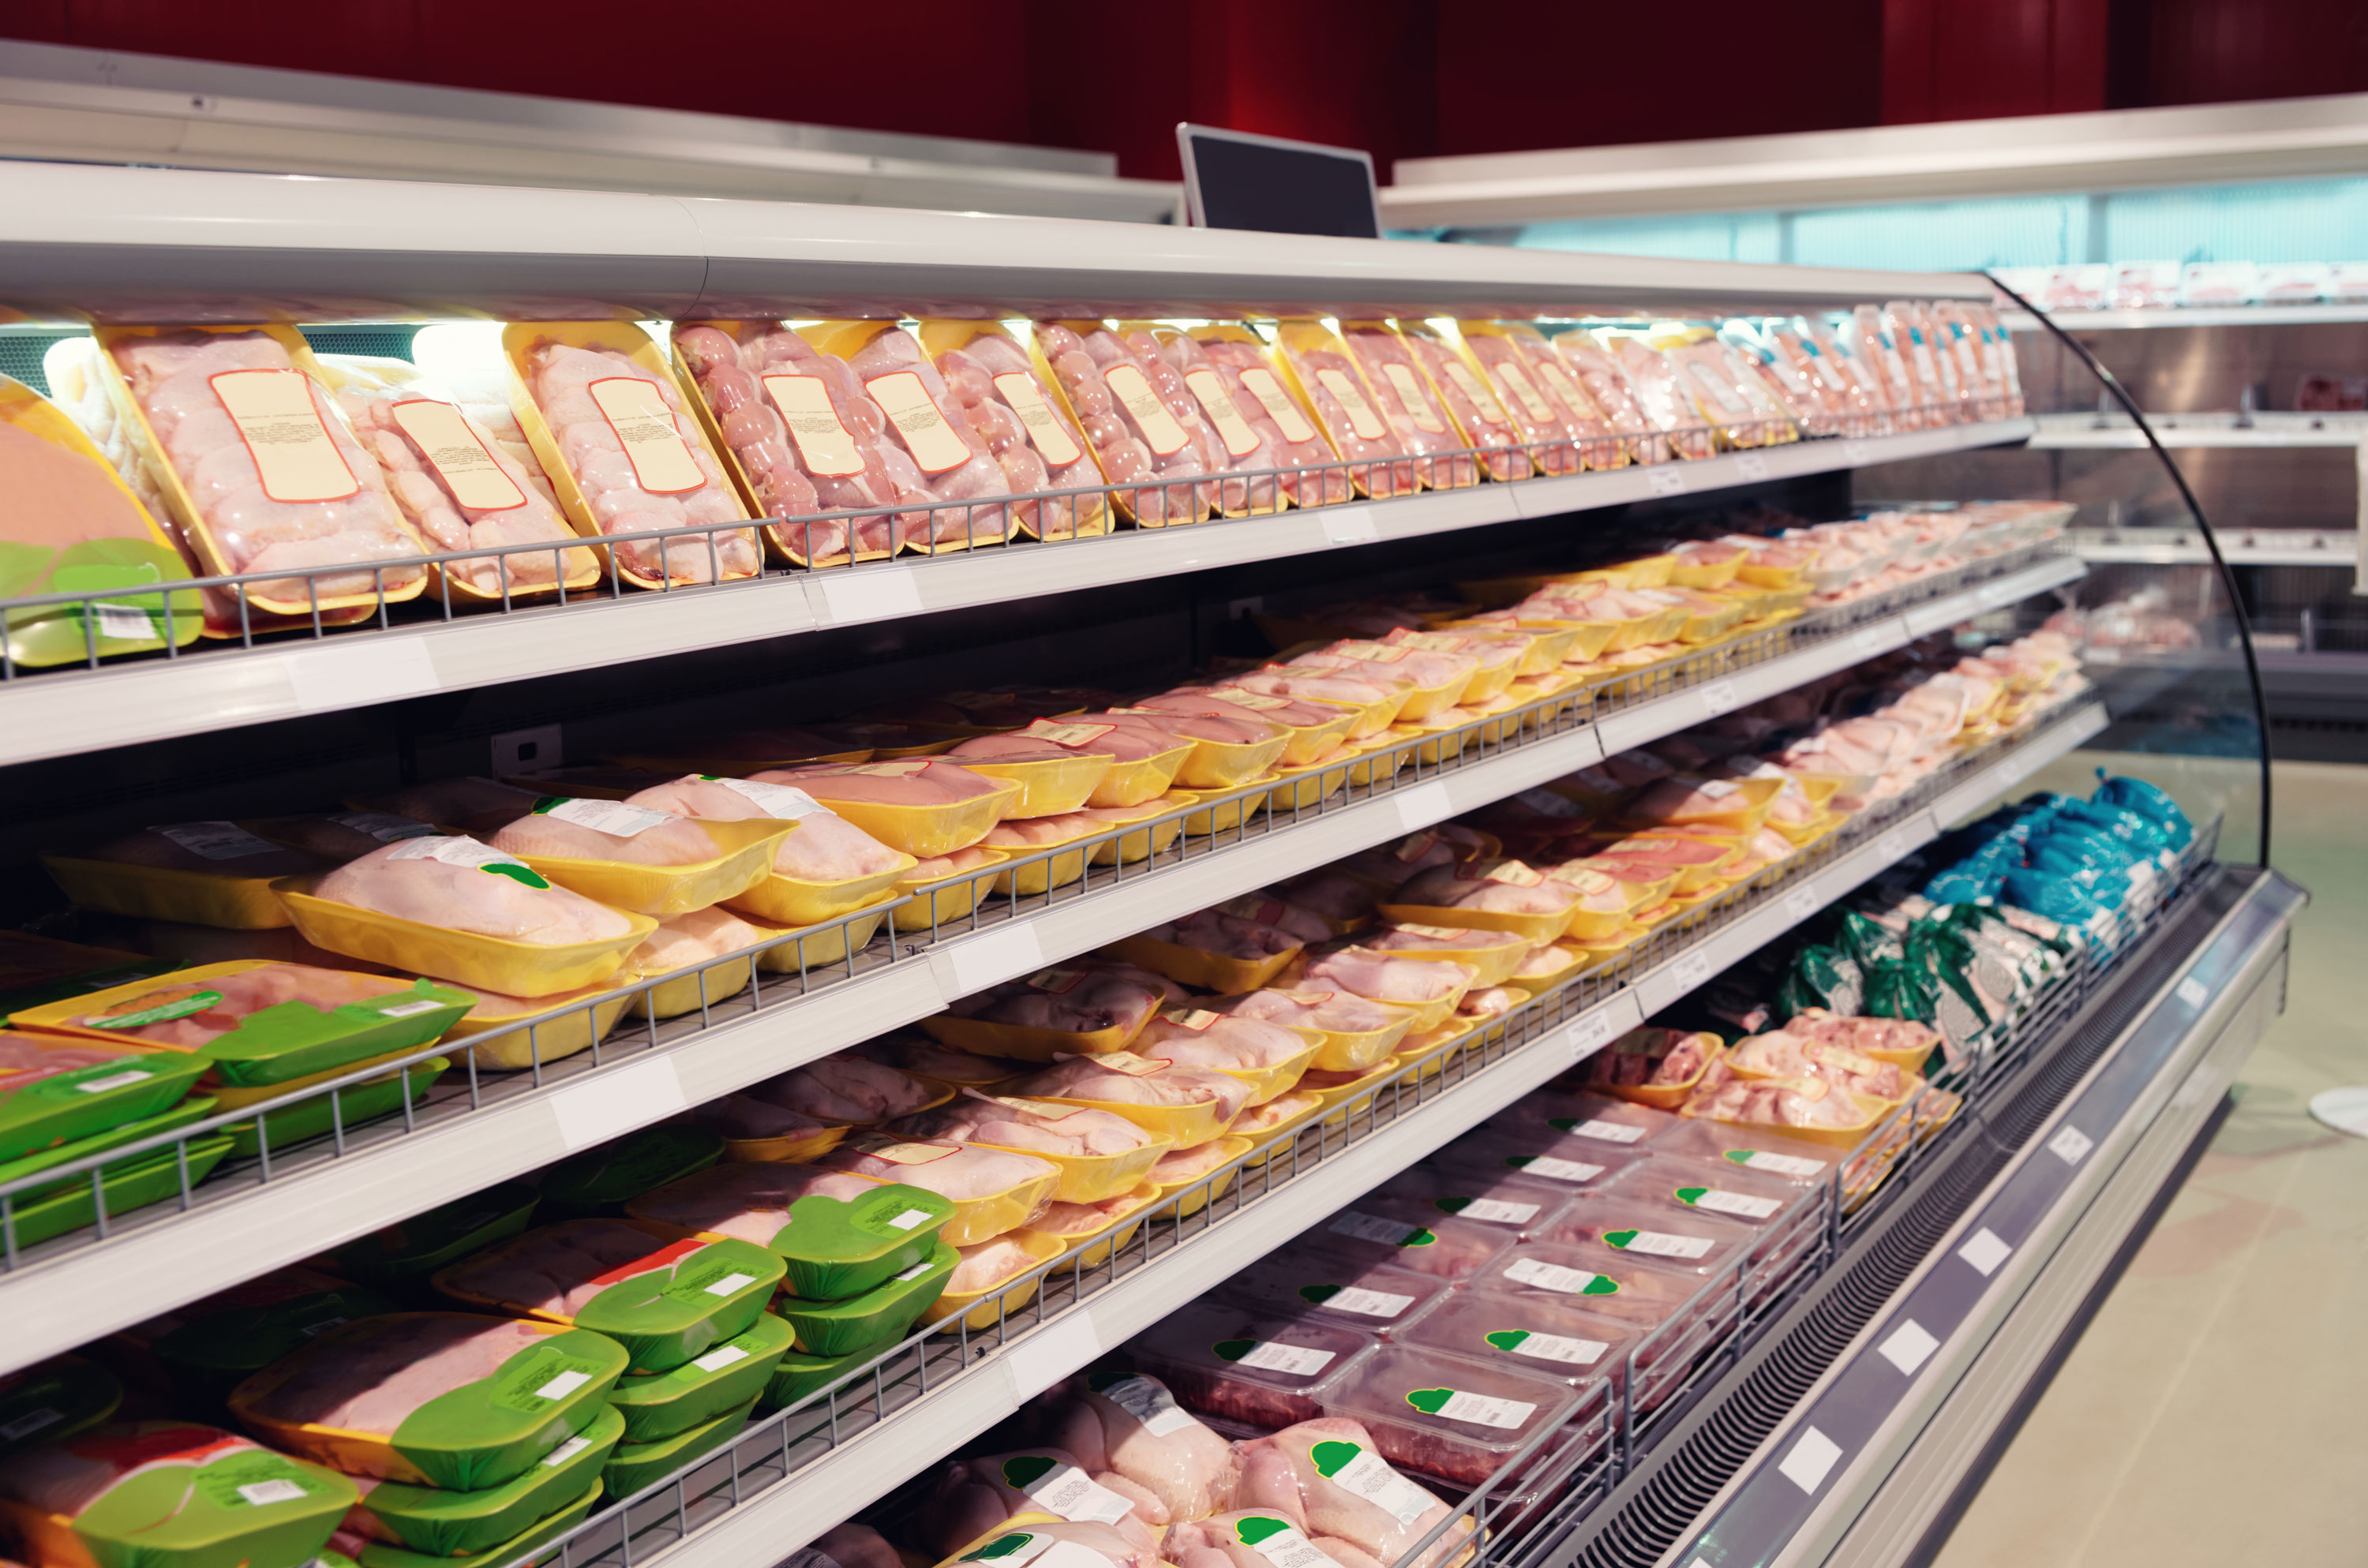 Various packaged poultry products on display in a cooler at a grocery store.